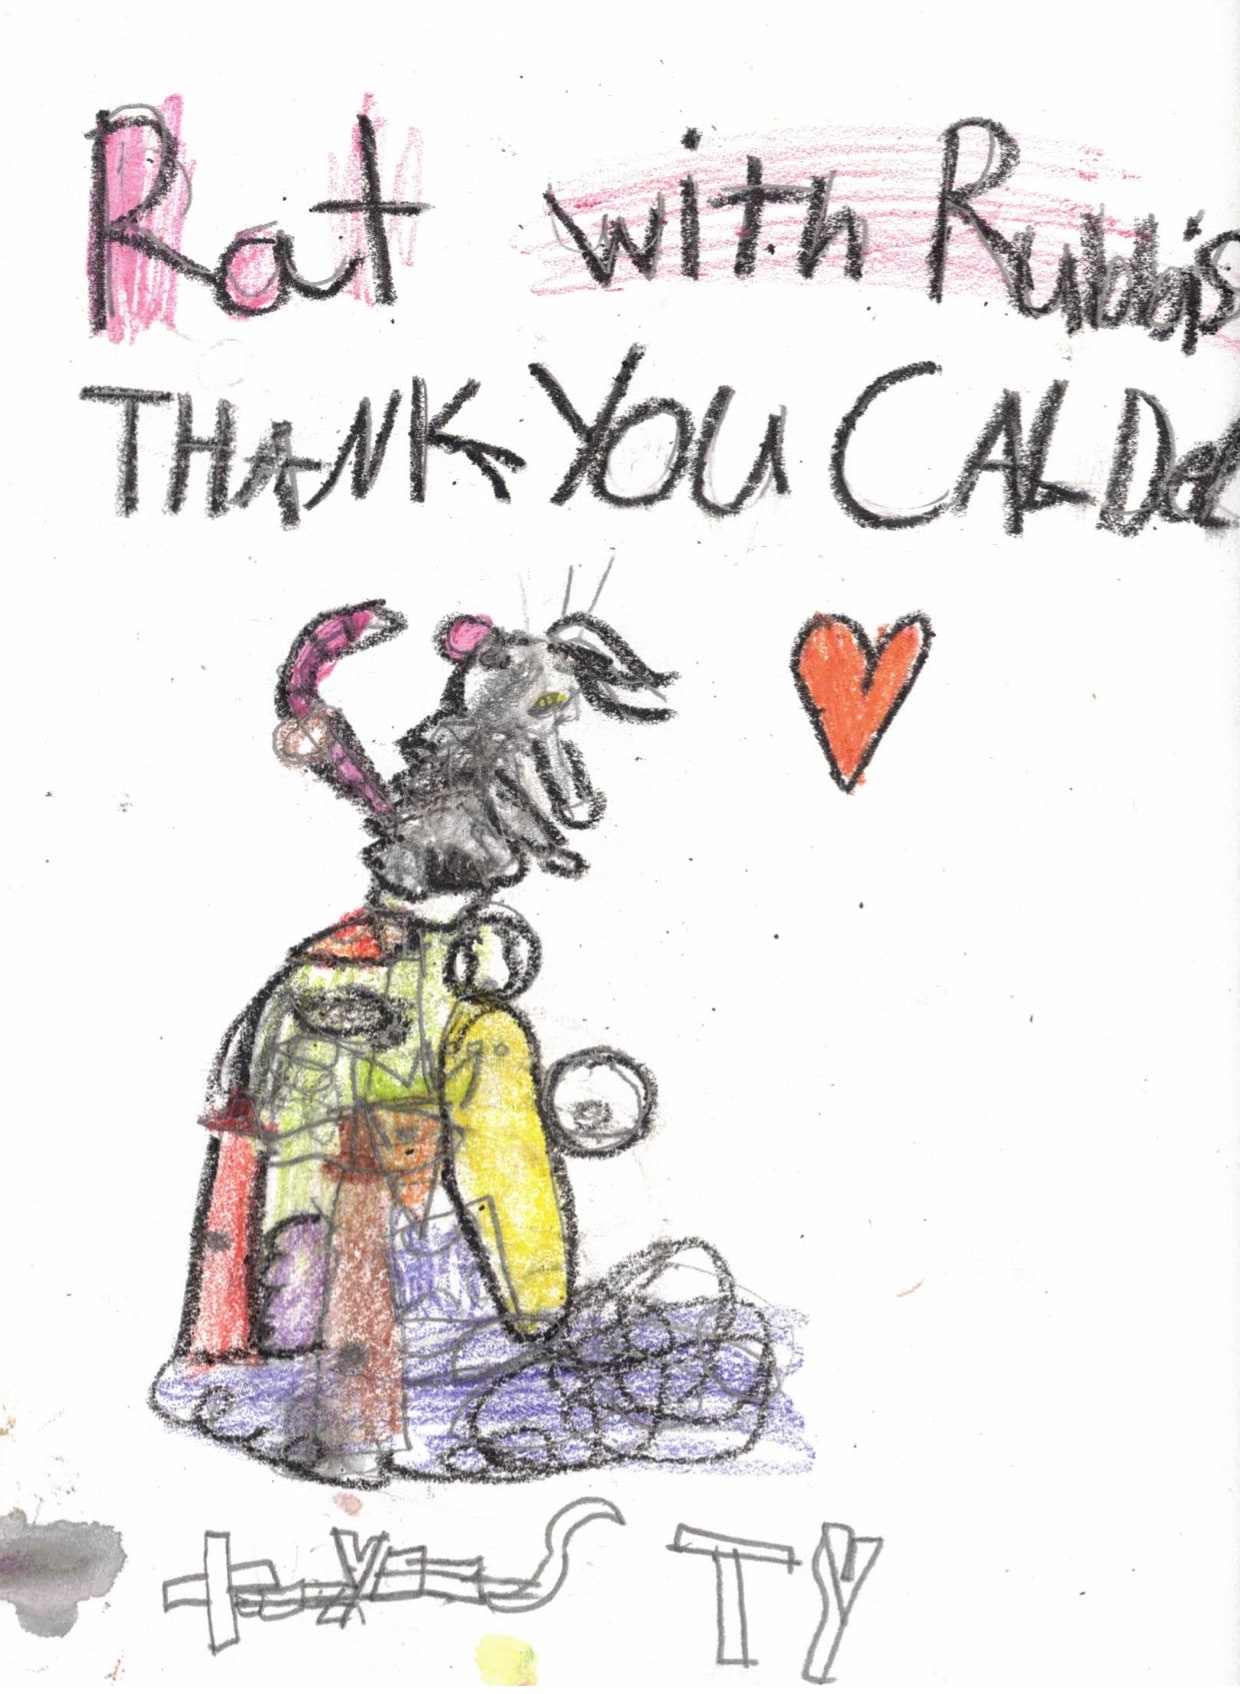 Rosewood+Calder crayon drawing of "Rat with Rubbish" a rat on top of a pile of debris and food with thank you message